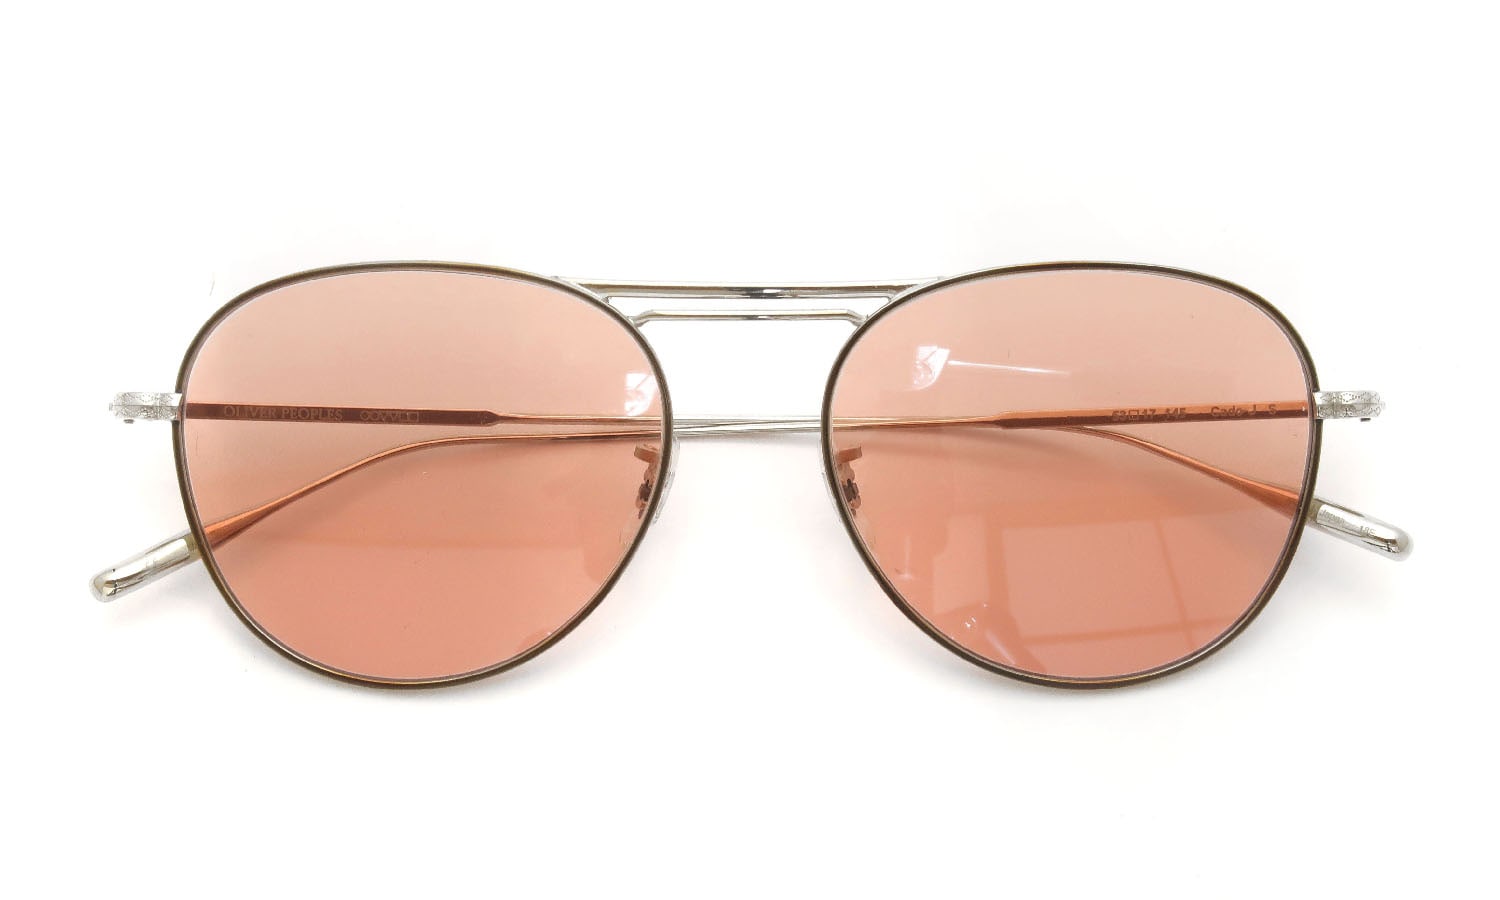 OLIVER PEOPLES archive サングラス Cade J S通販 S生産：オプテック